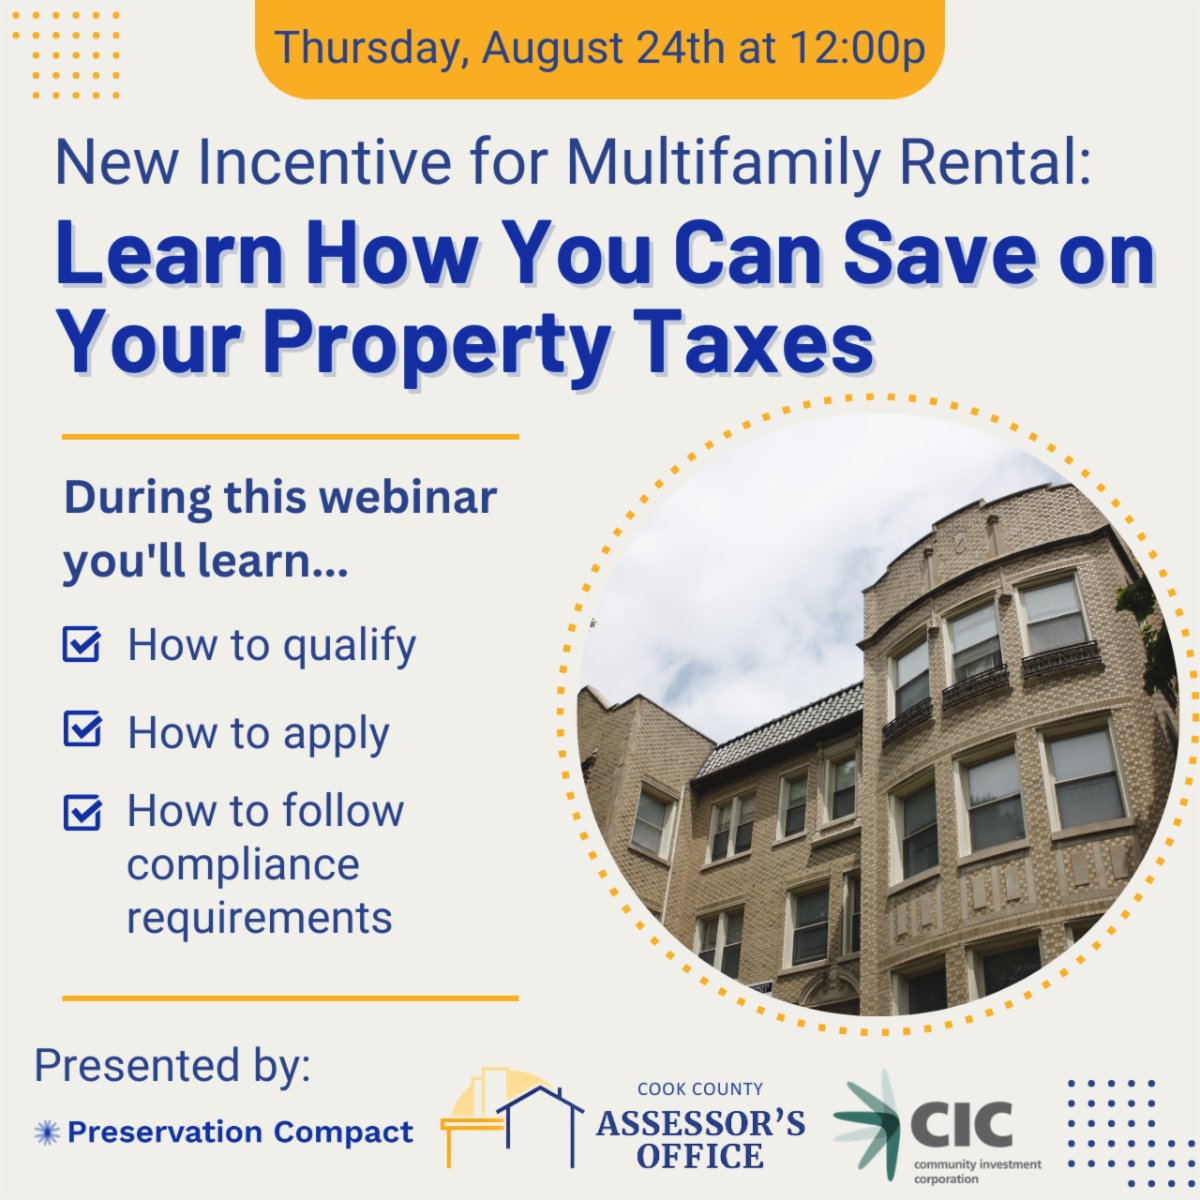 Join @PresCompact, CIC & @AssessorCook for a webinar on the Affordable Housing Special Assessment Program (AHSAP), offering property tax relief for Cook County multifamily housing. Qualification, application & compliance details will be covered. Sign up: bit.ly/3YCEKTQ